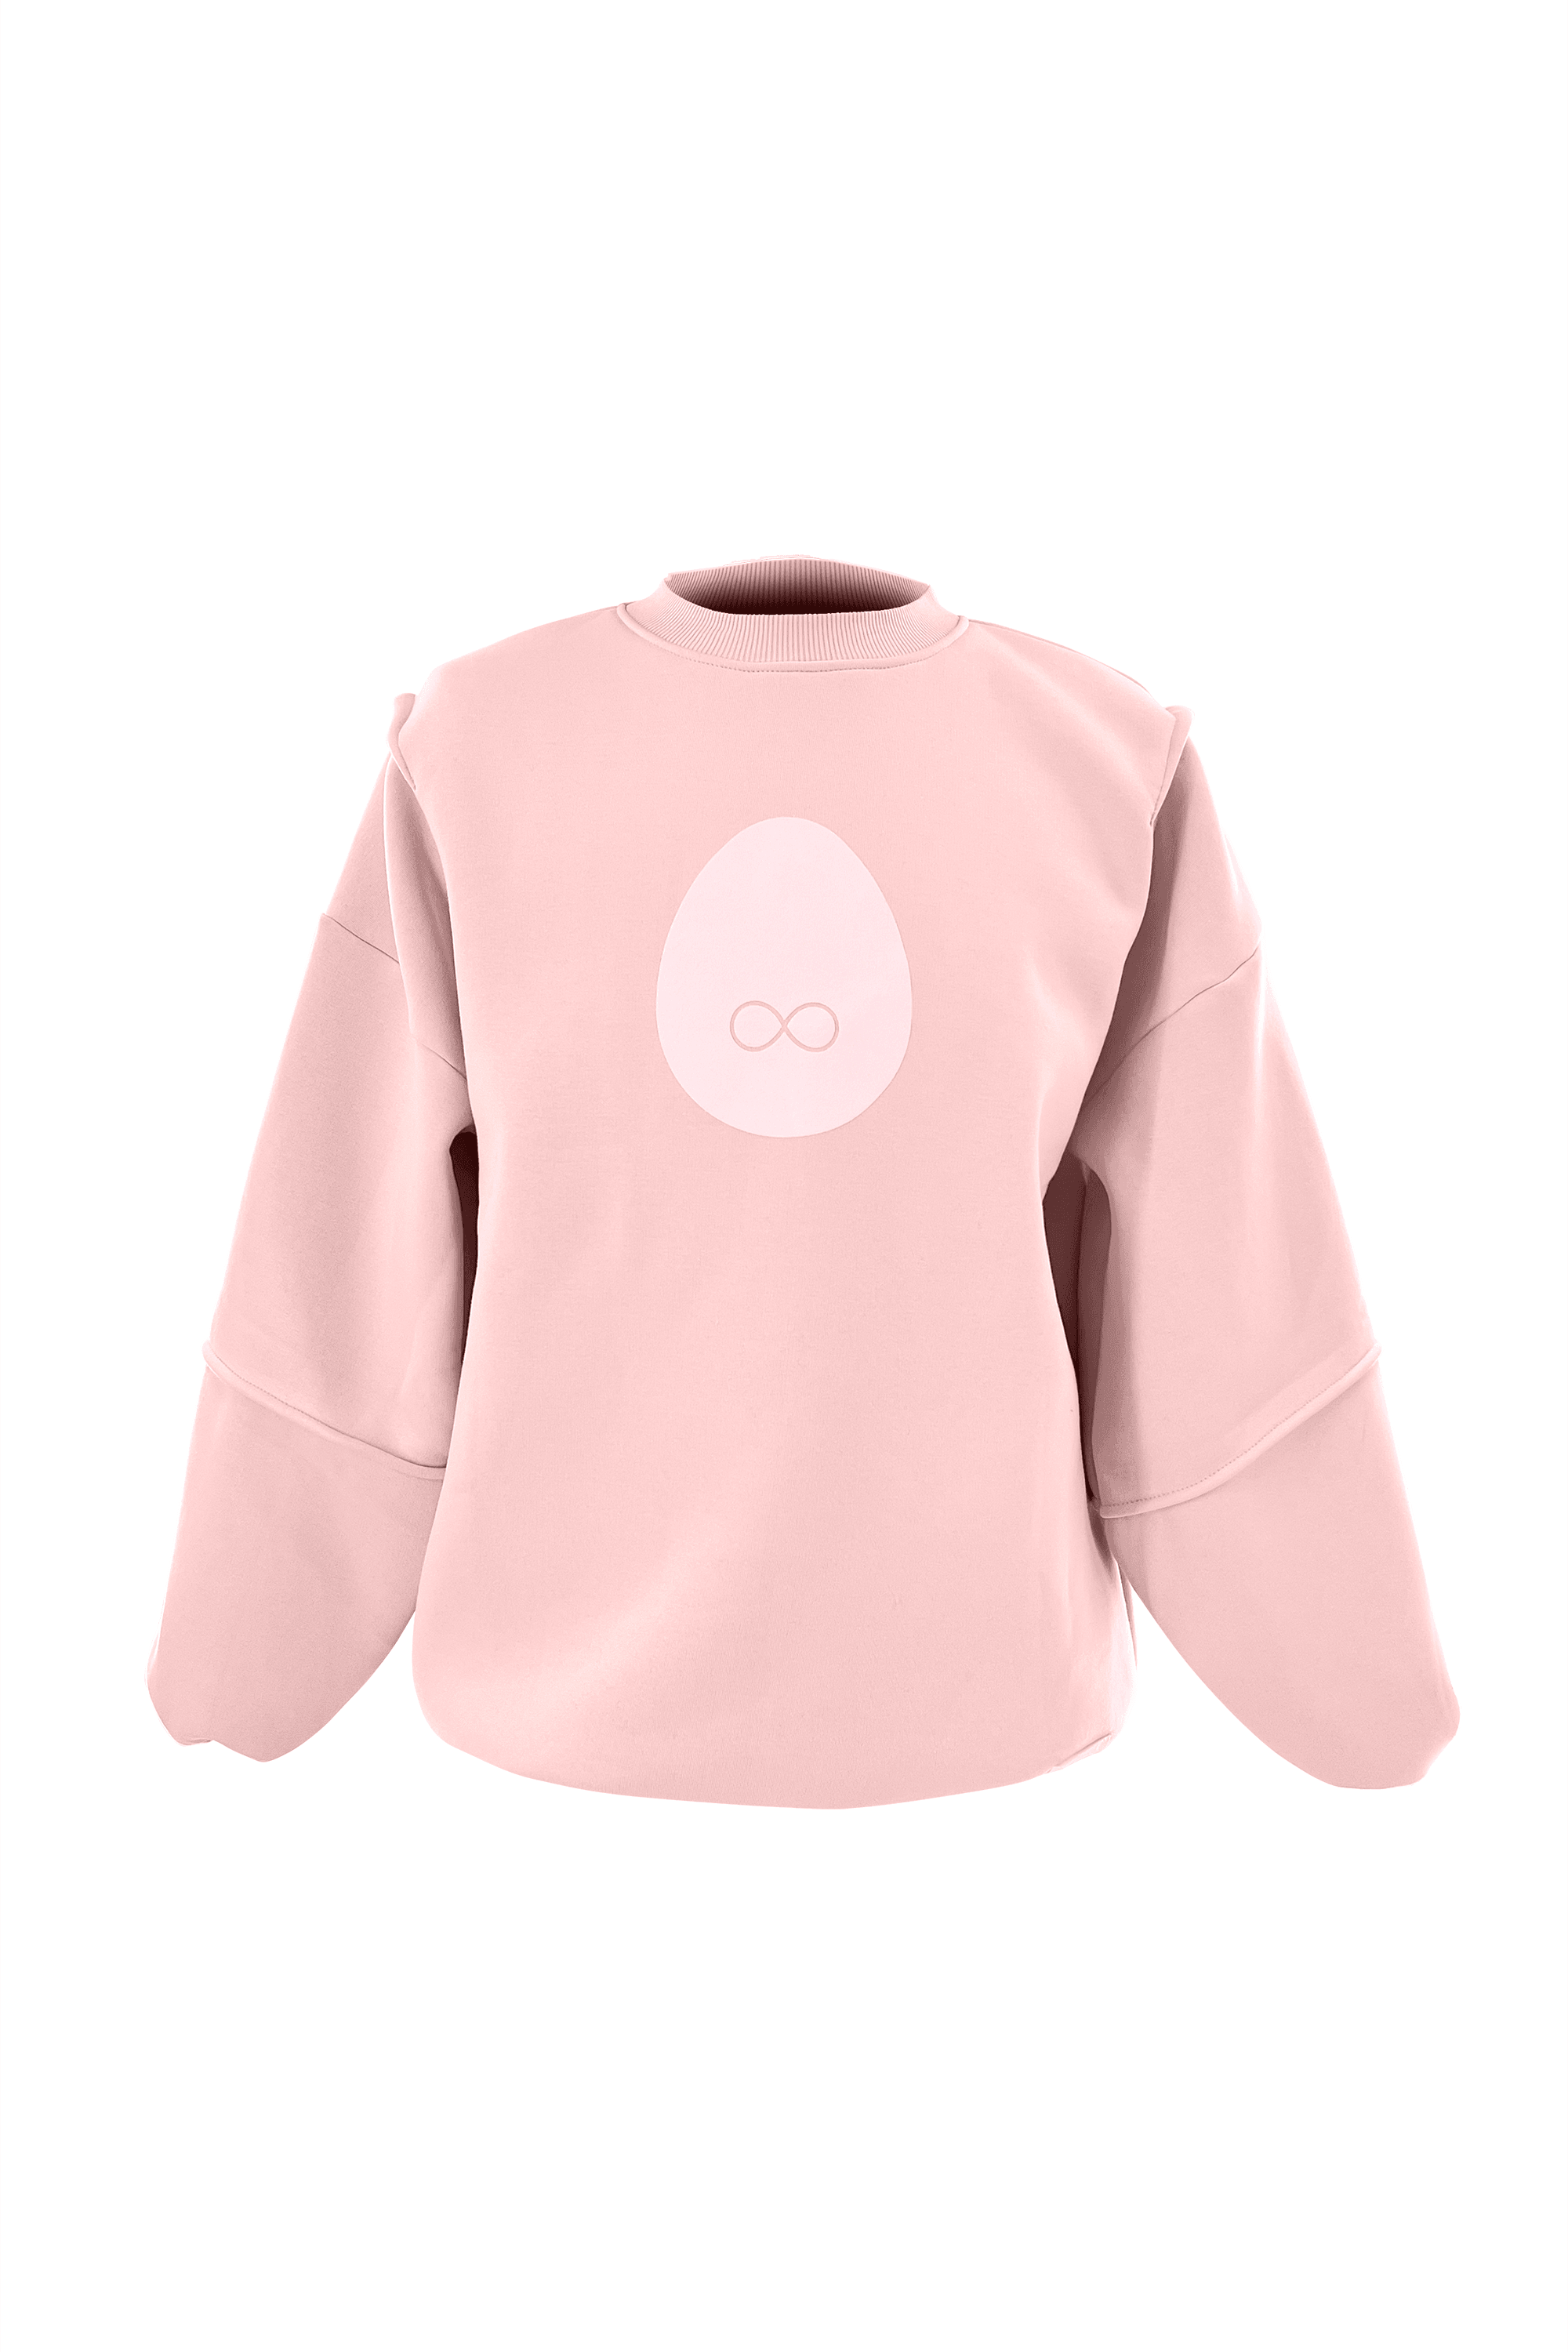 BE Pink sweater